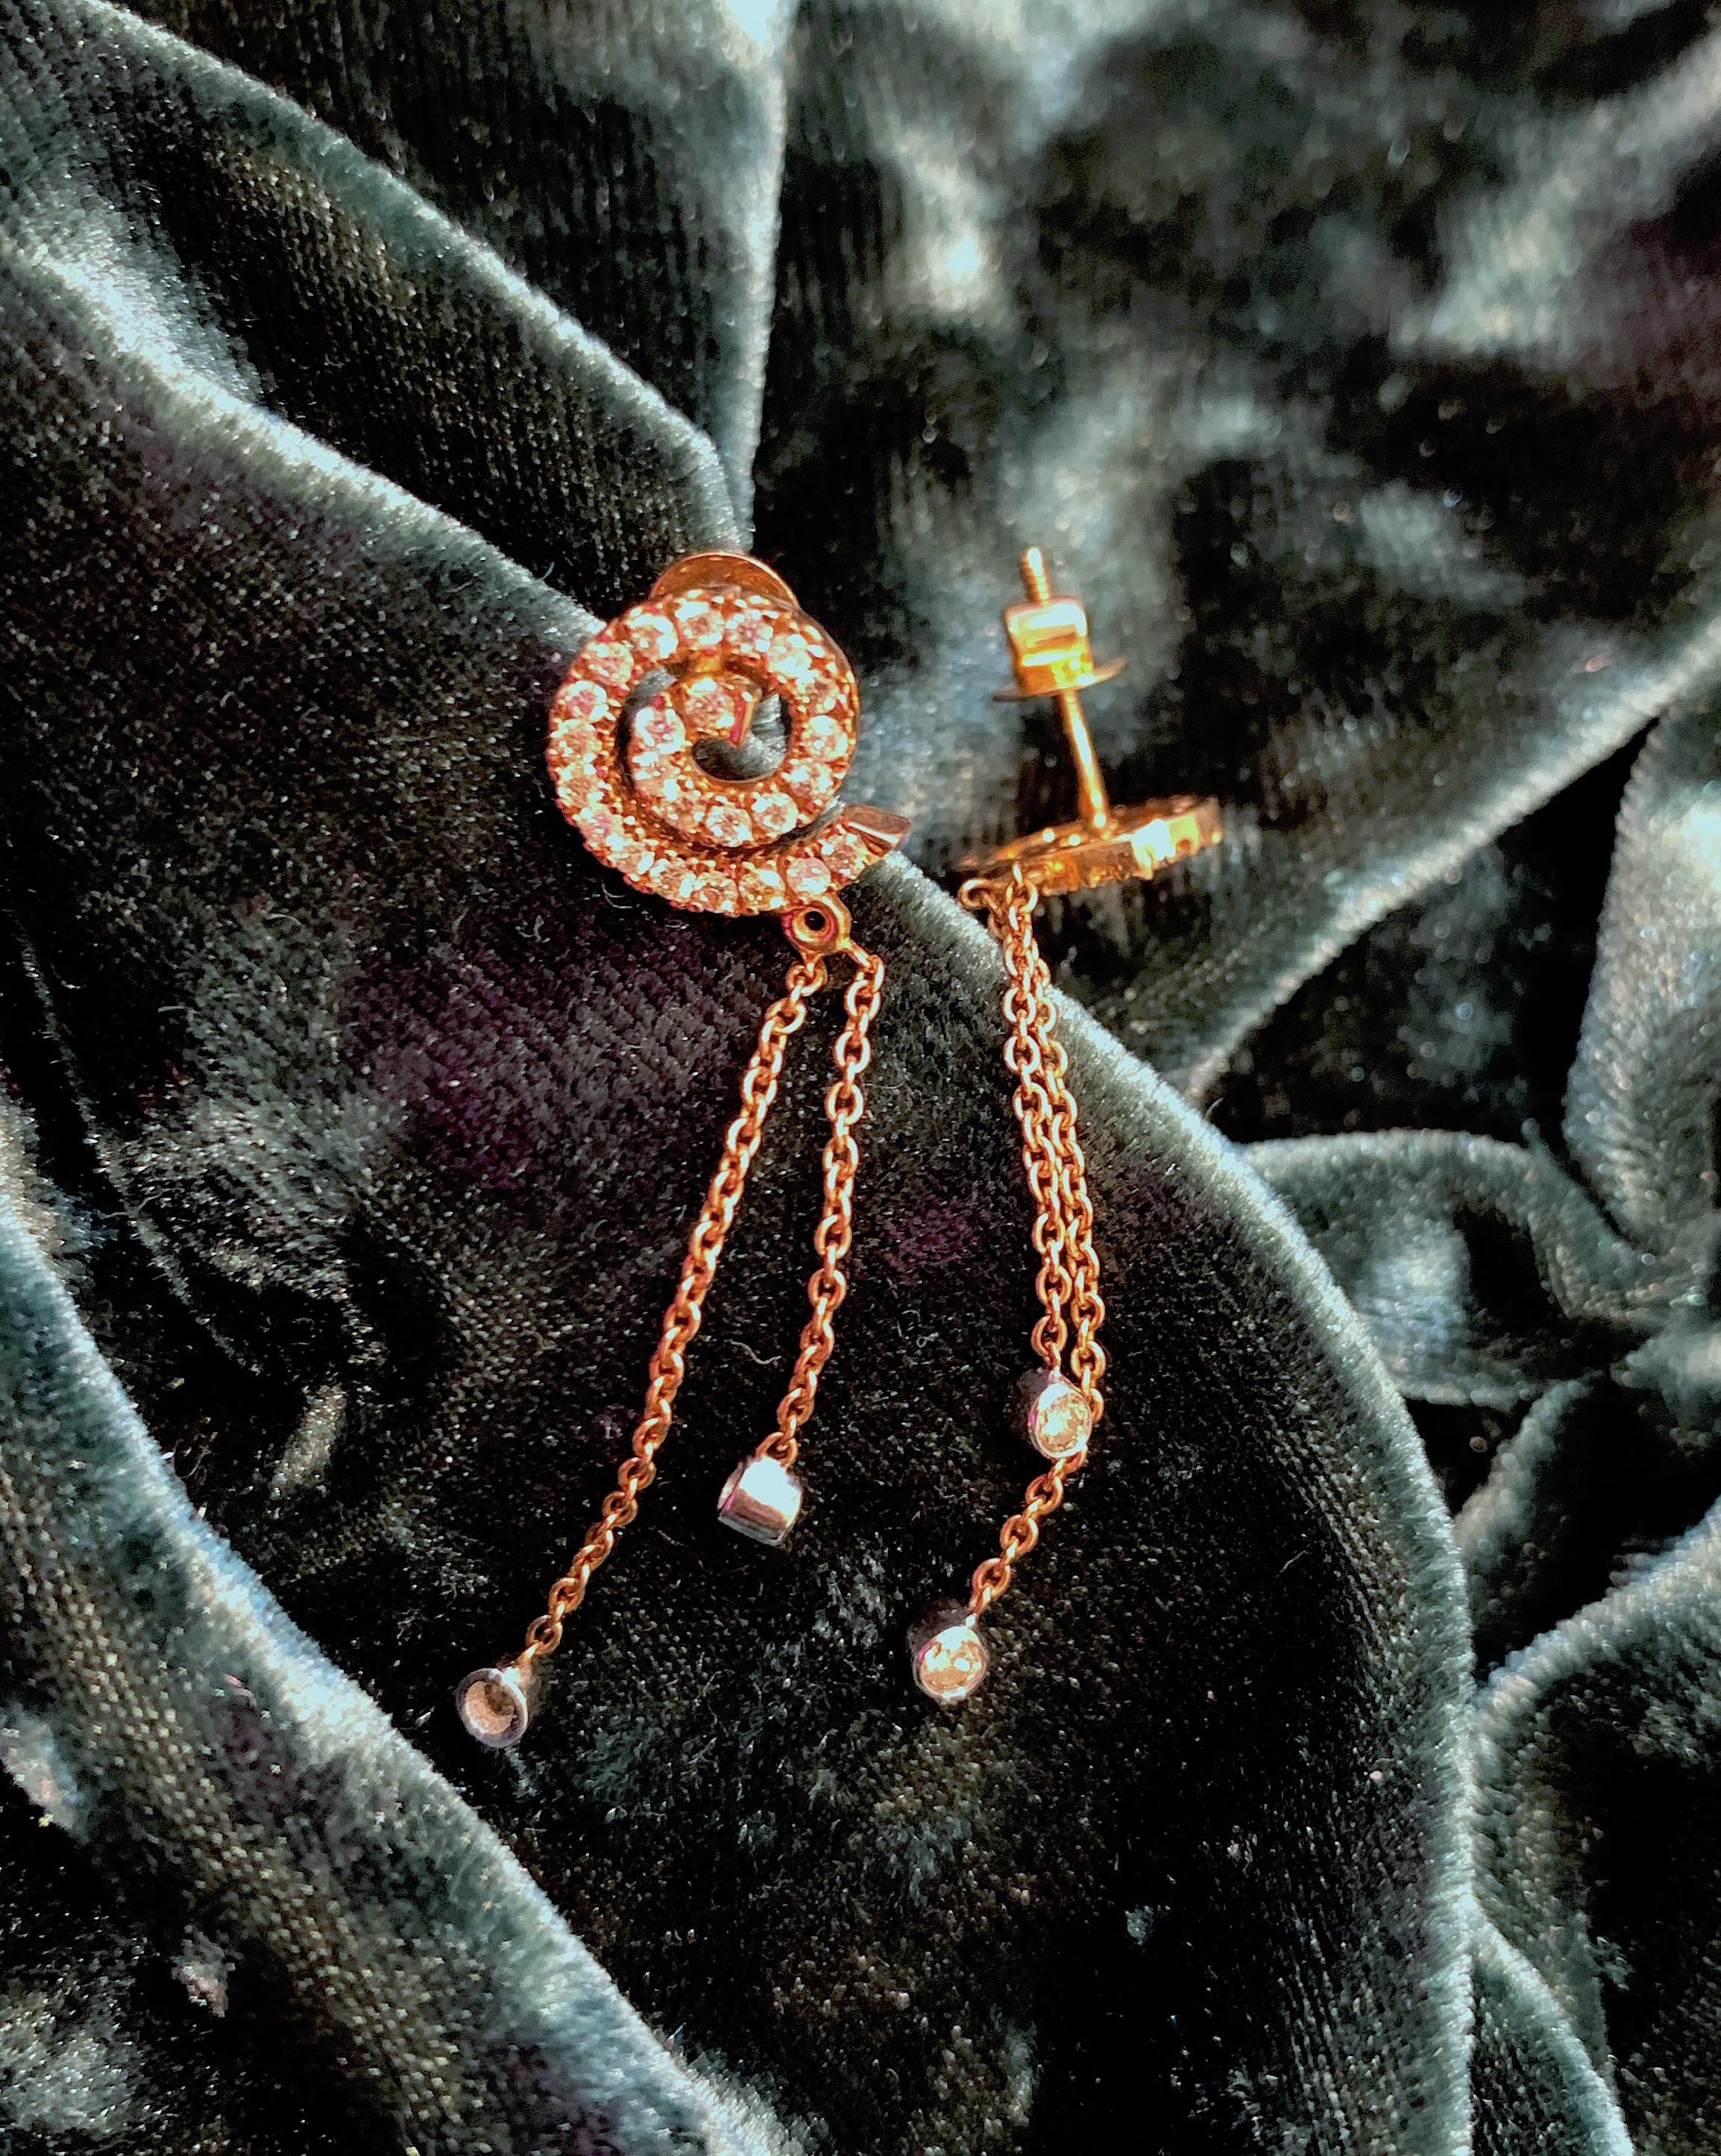 These Dazzling rose gold spiral diamond fringe earrings are set in fine 18k rose gold with diamond drops.
Most of our jewels are made to order, so please allow us for a 2-4 week delivery.
Please note the possibility of natural inclusions in gemstones